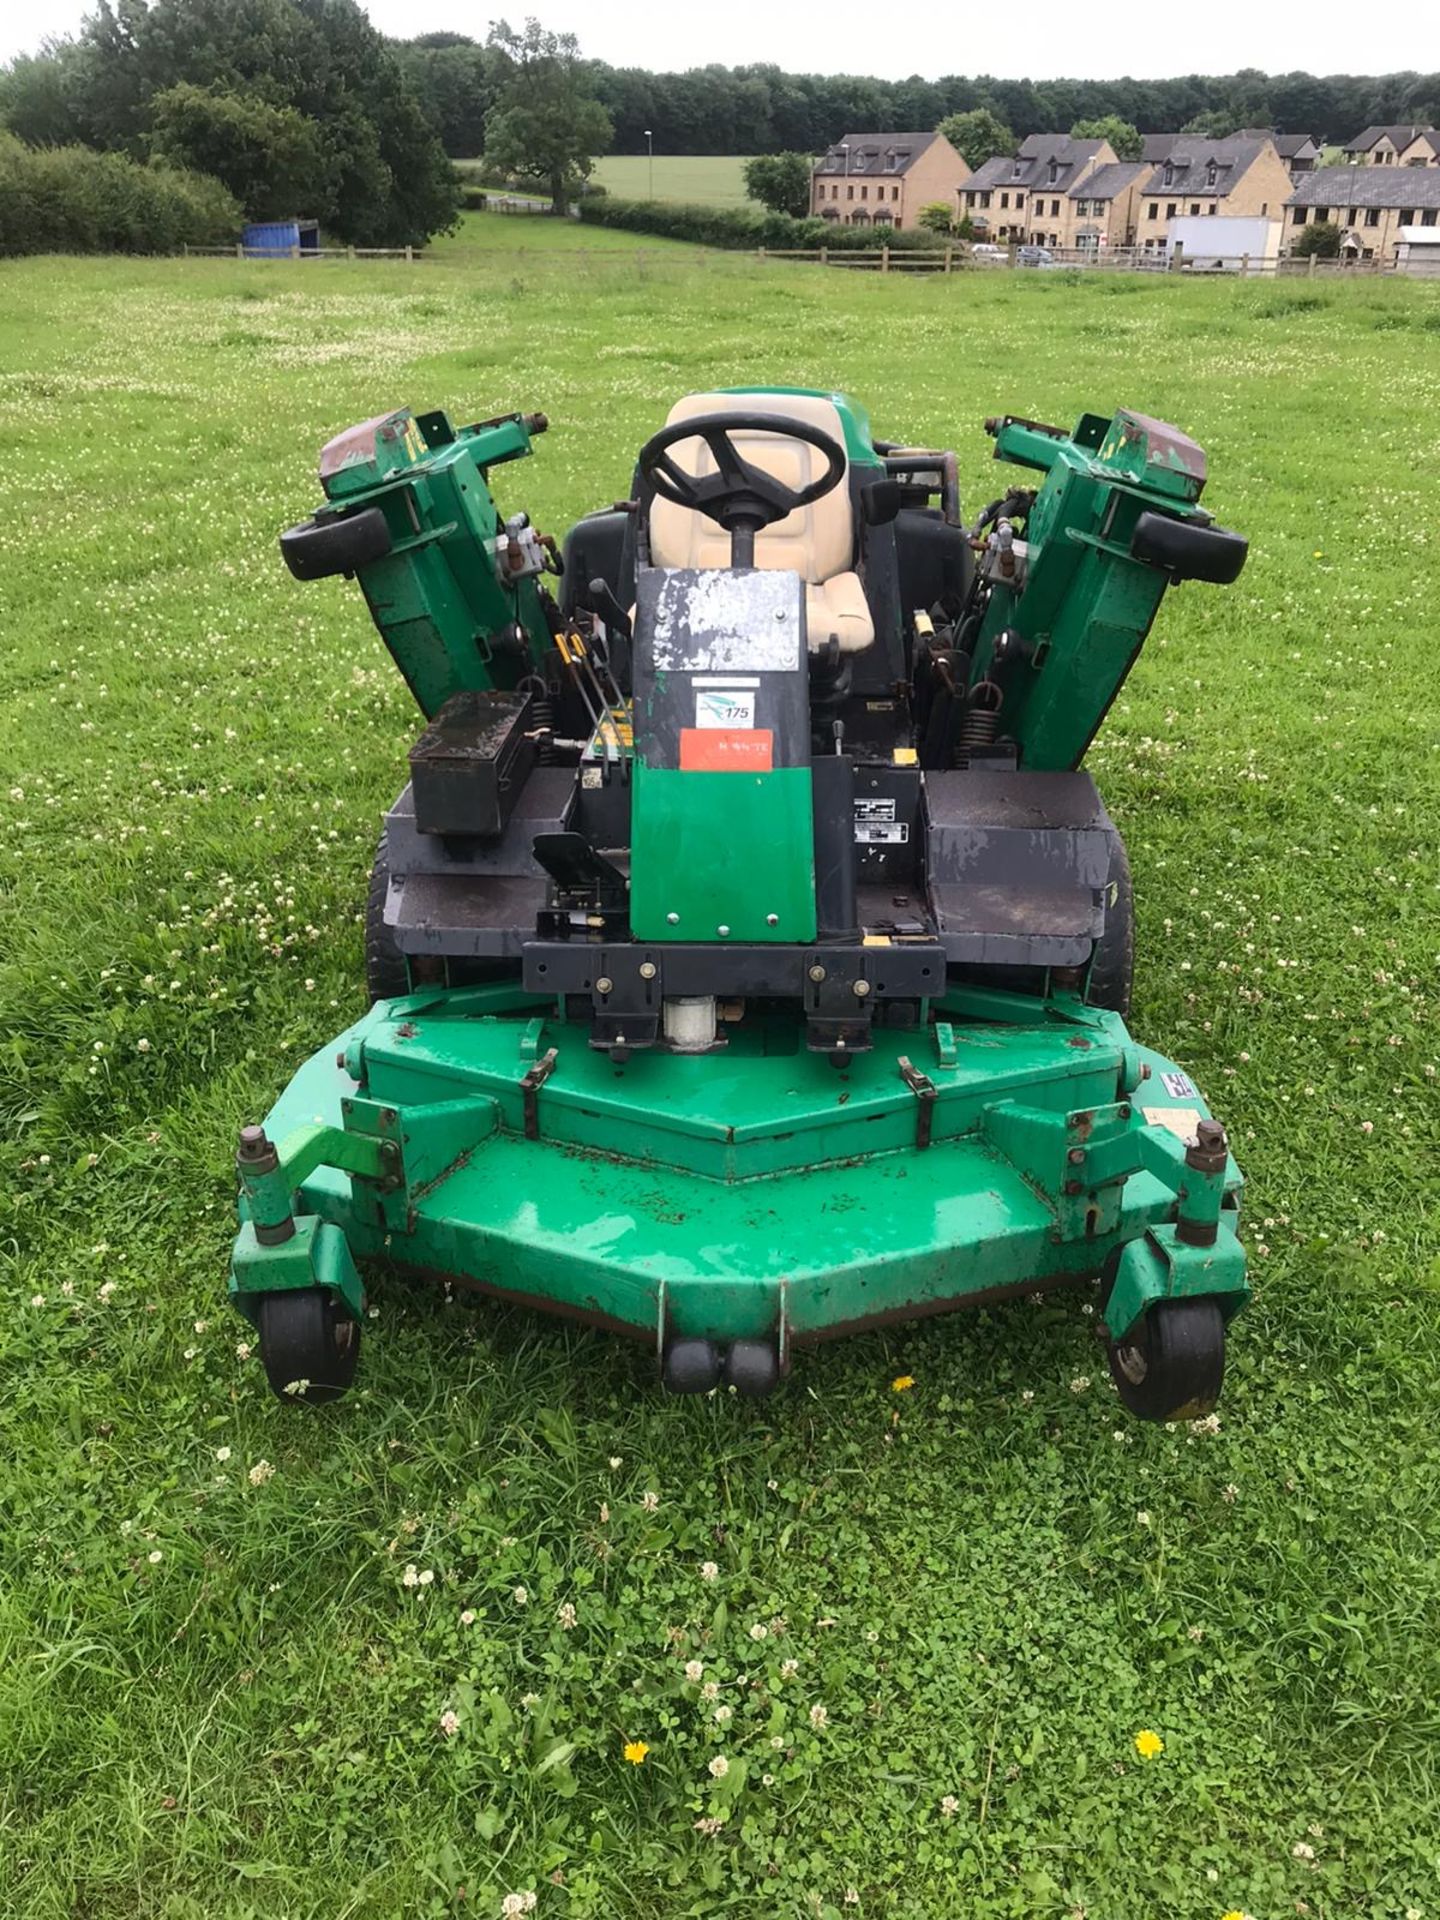 RANSOMES HR6010 BATWING RIDE ON LAWN MOWER, YEAR 2007, ONLY DONE 3431 HOURS *NO VAT* - Image 3 of 13